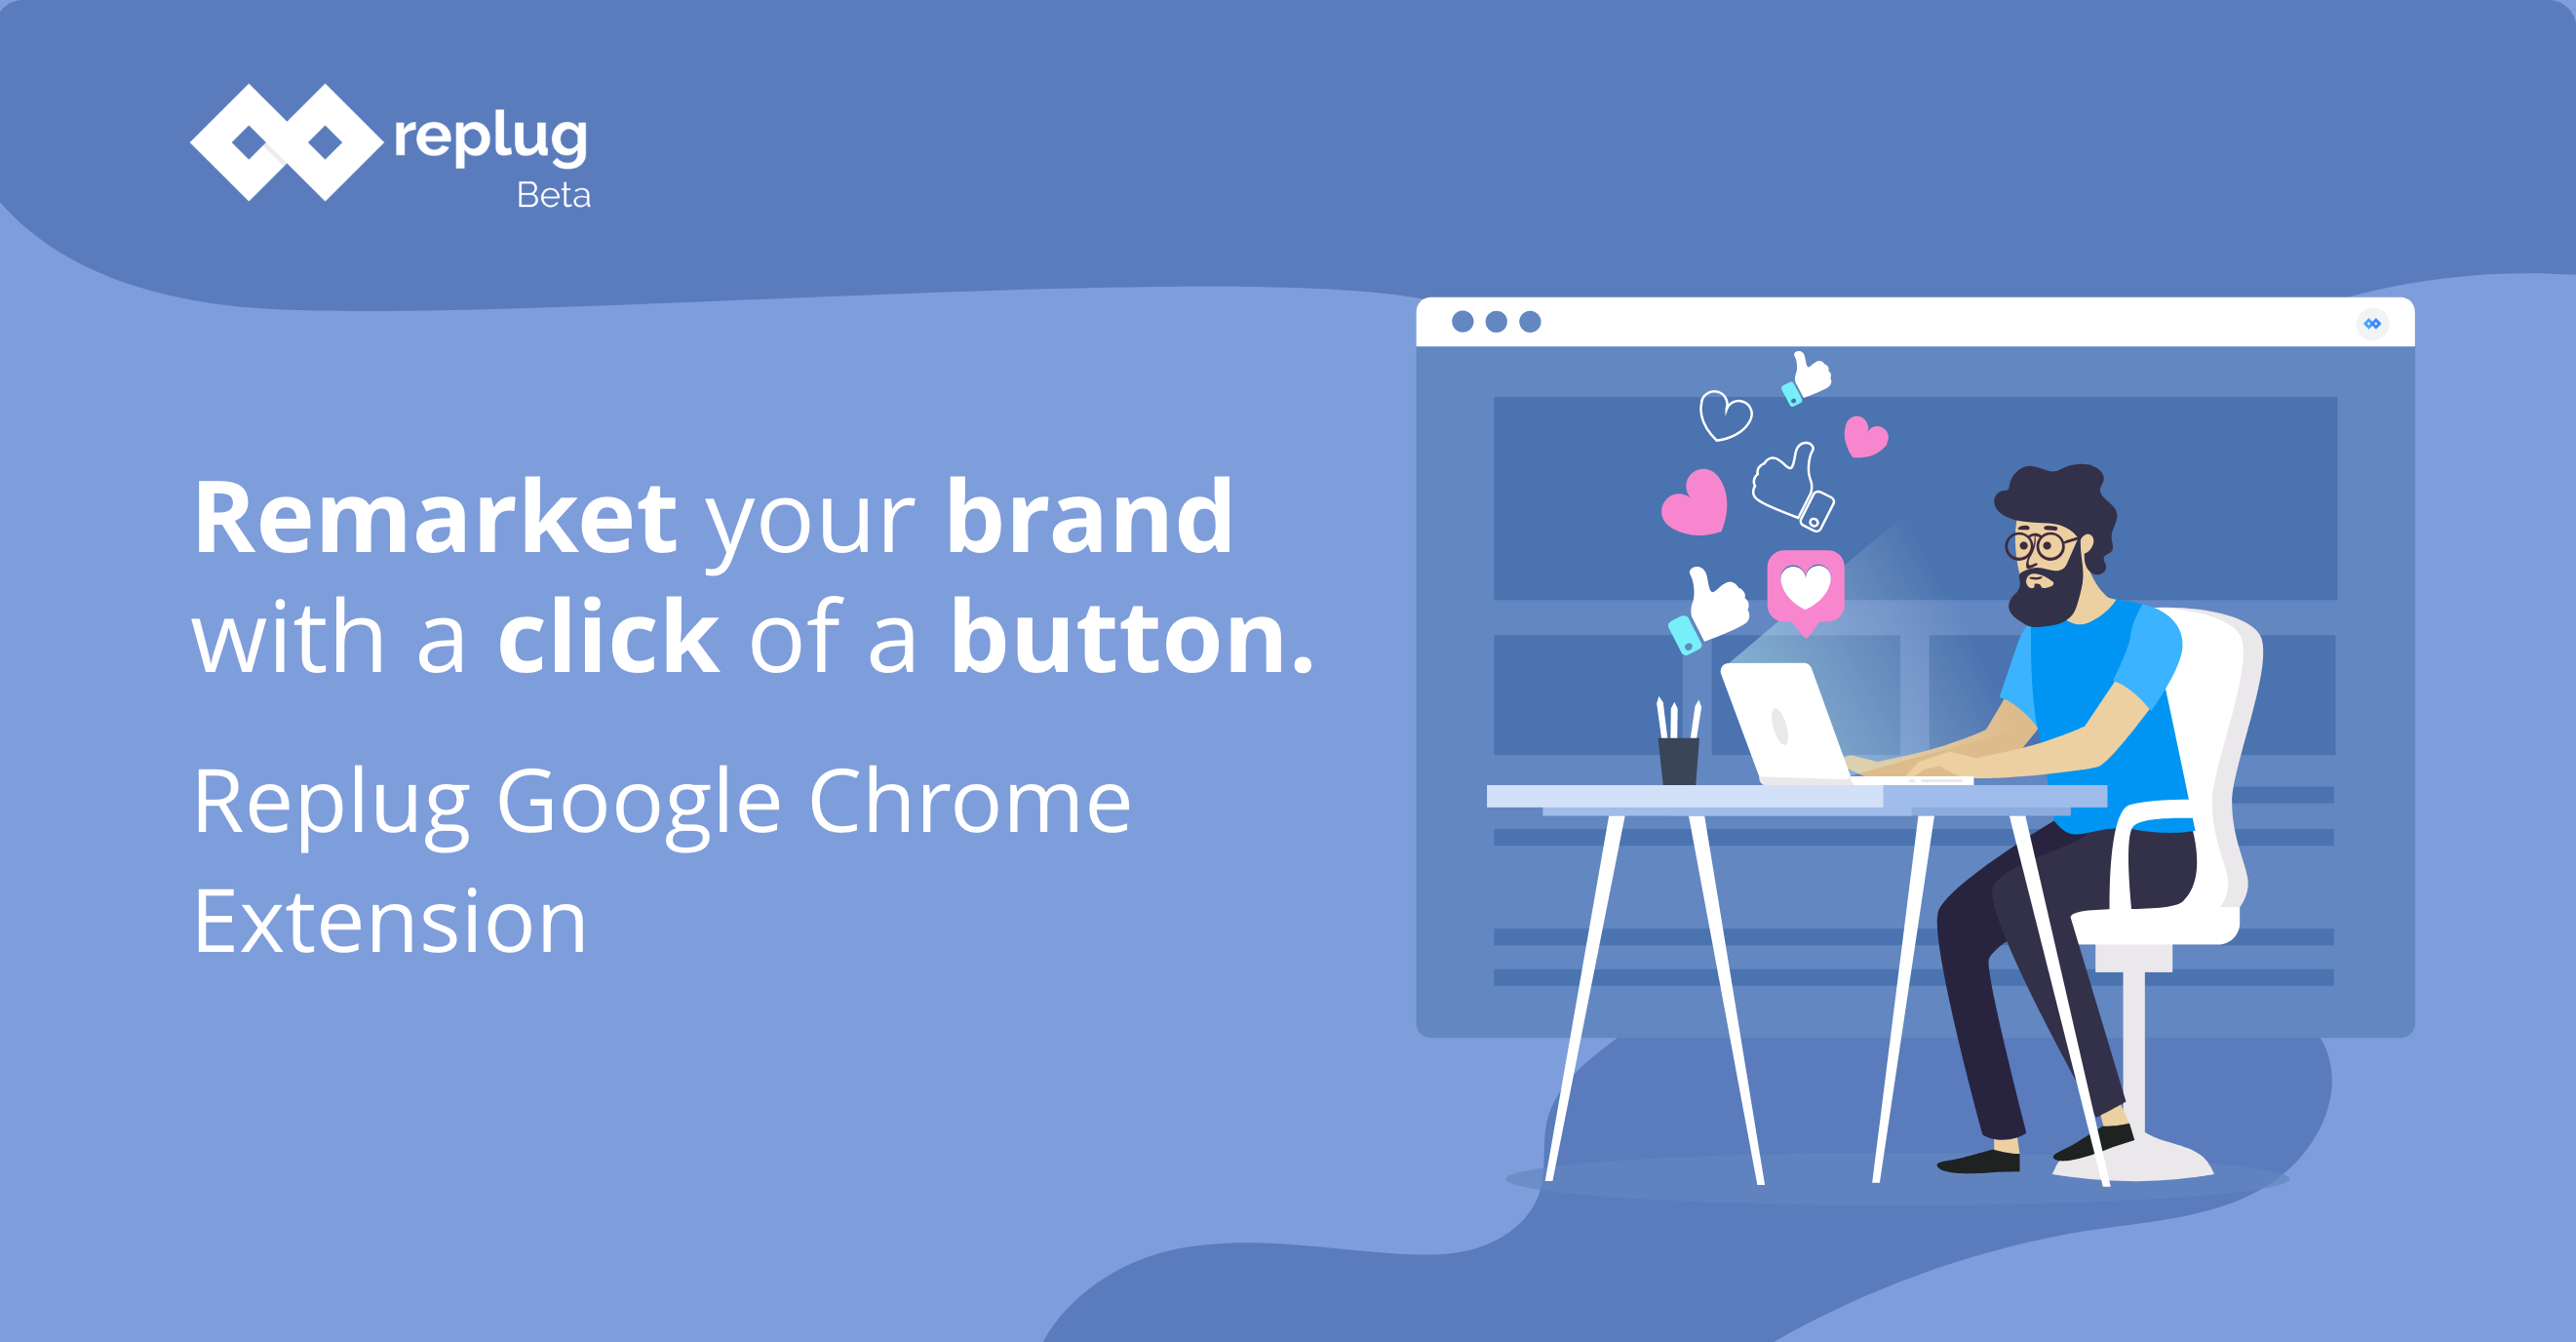 Remarket your brand with a click of a button – Replug Chrome Extension